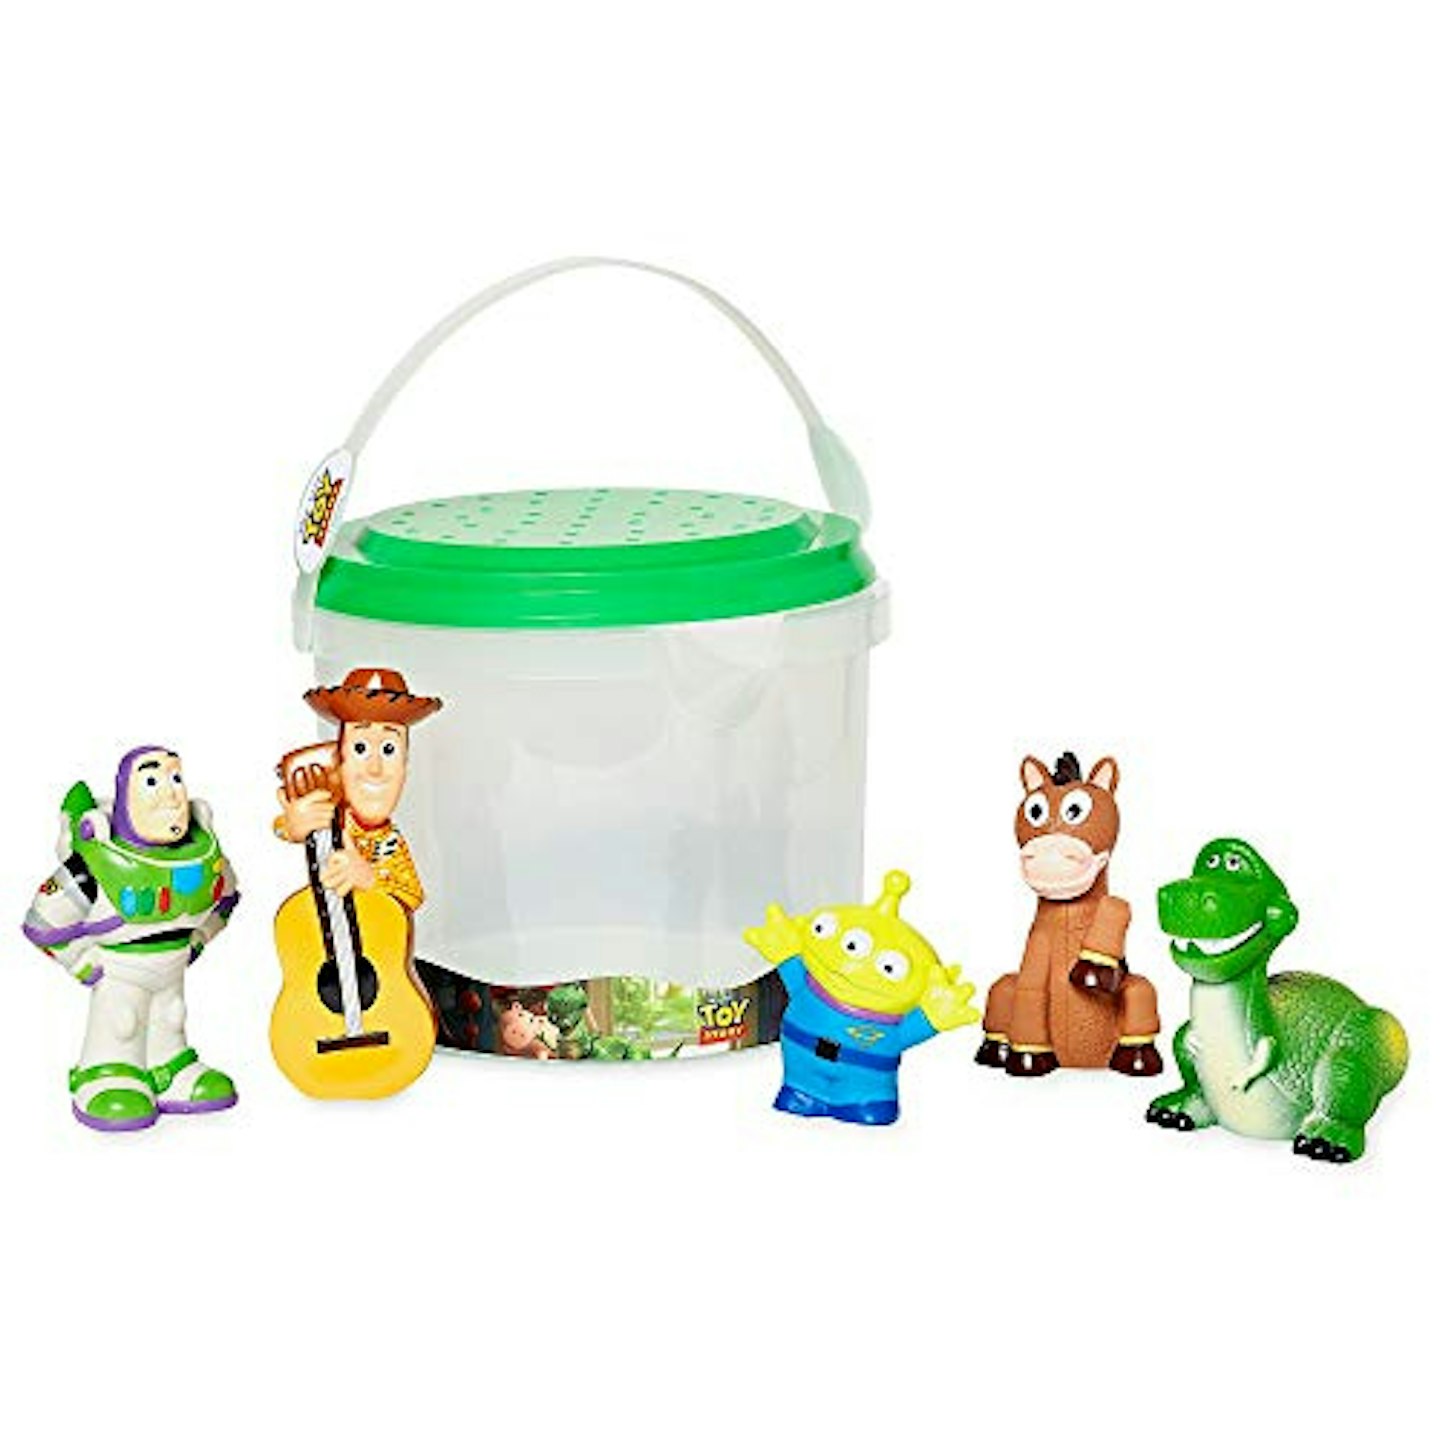 Toy Story Deluxe Bath Toy Set 